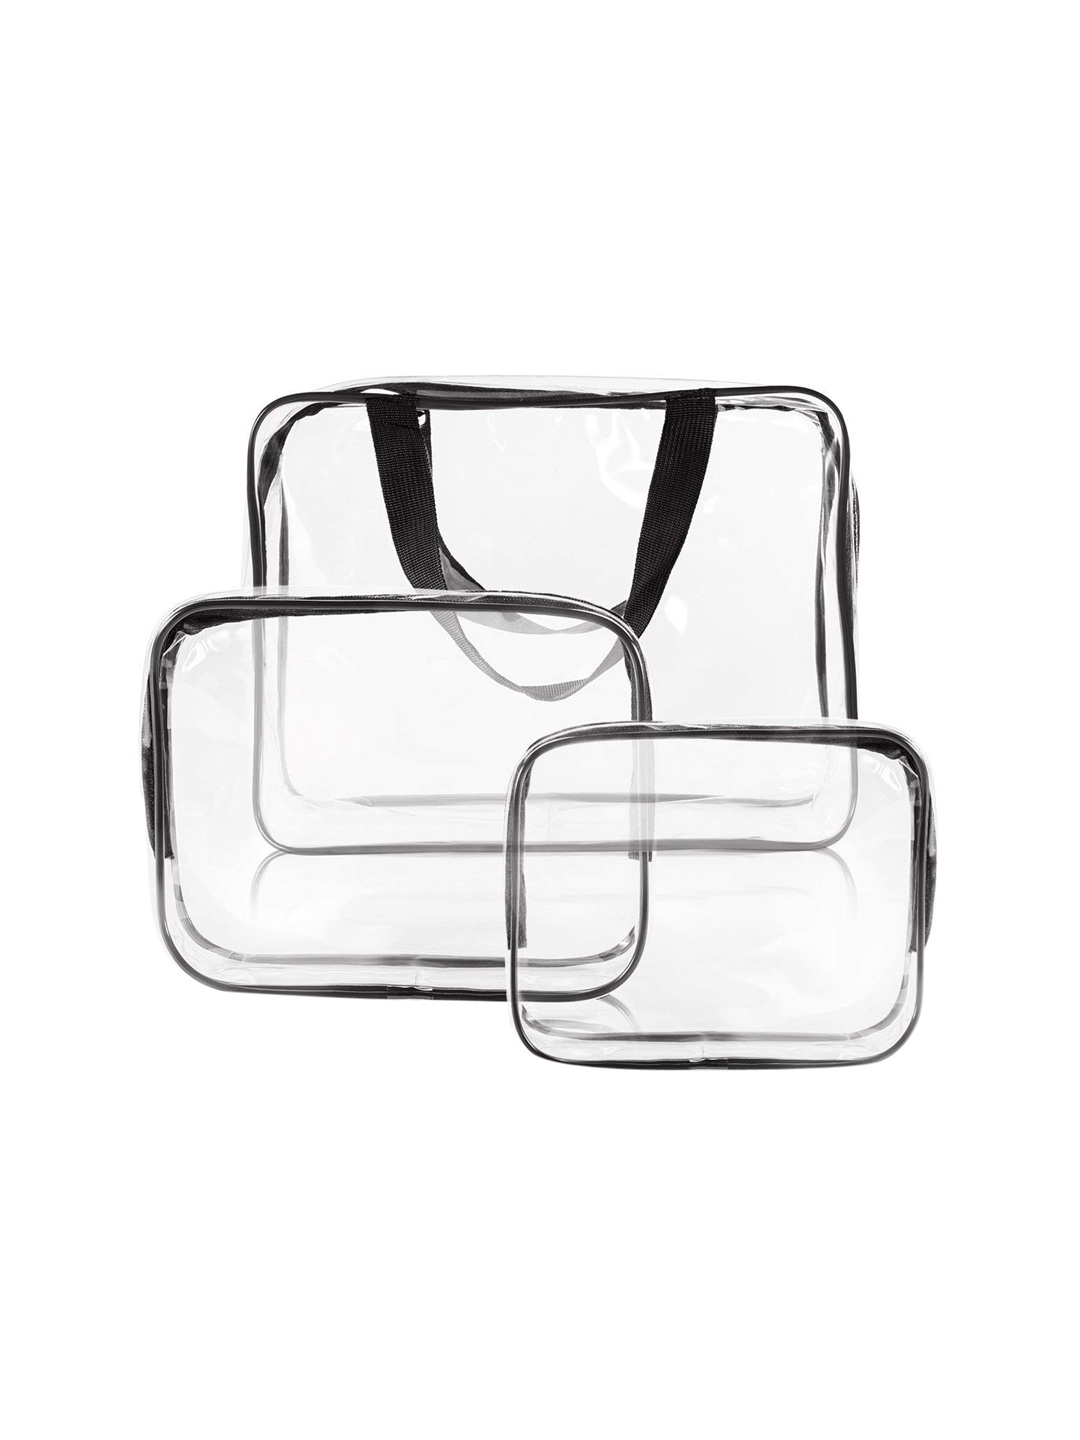 HOUSE OF QUIRK Set Of 3 White Solid Makeup Storage Organisers